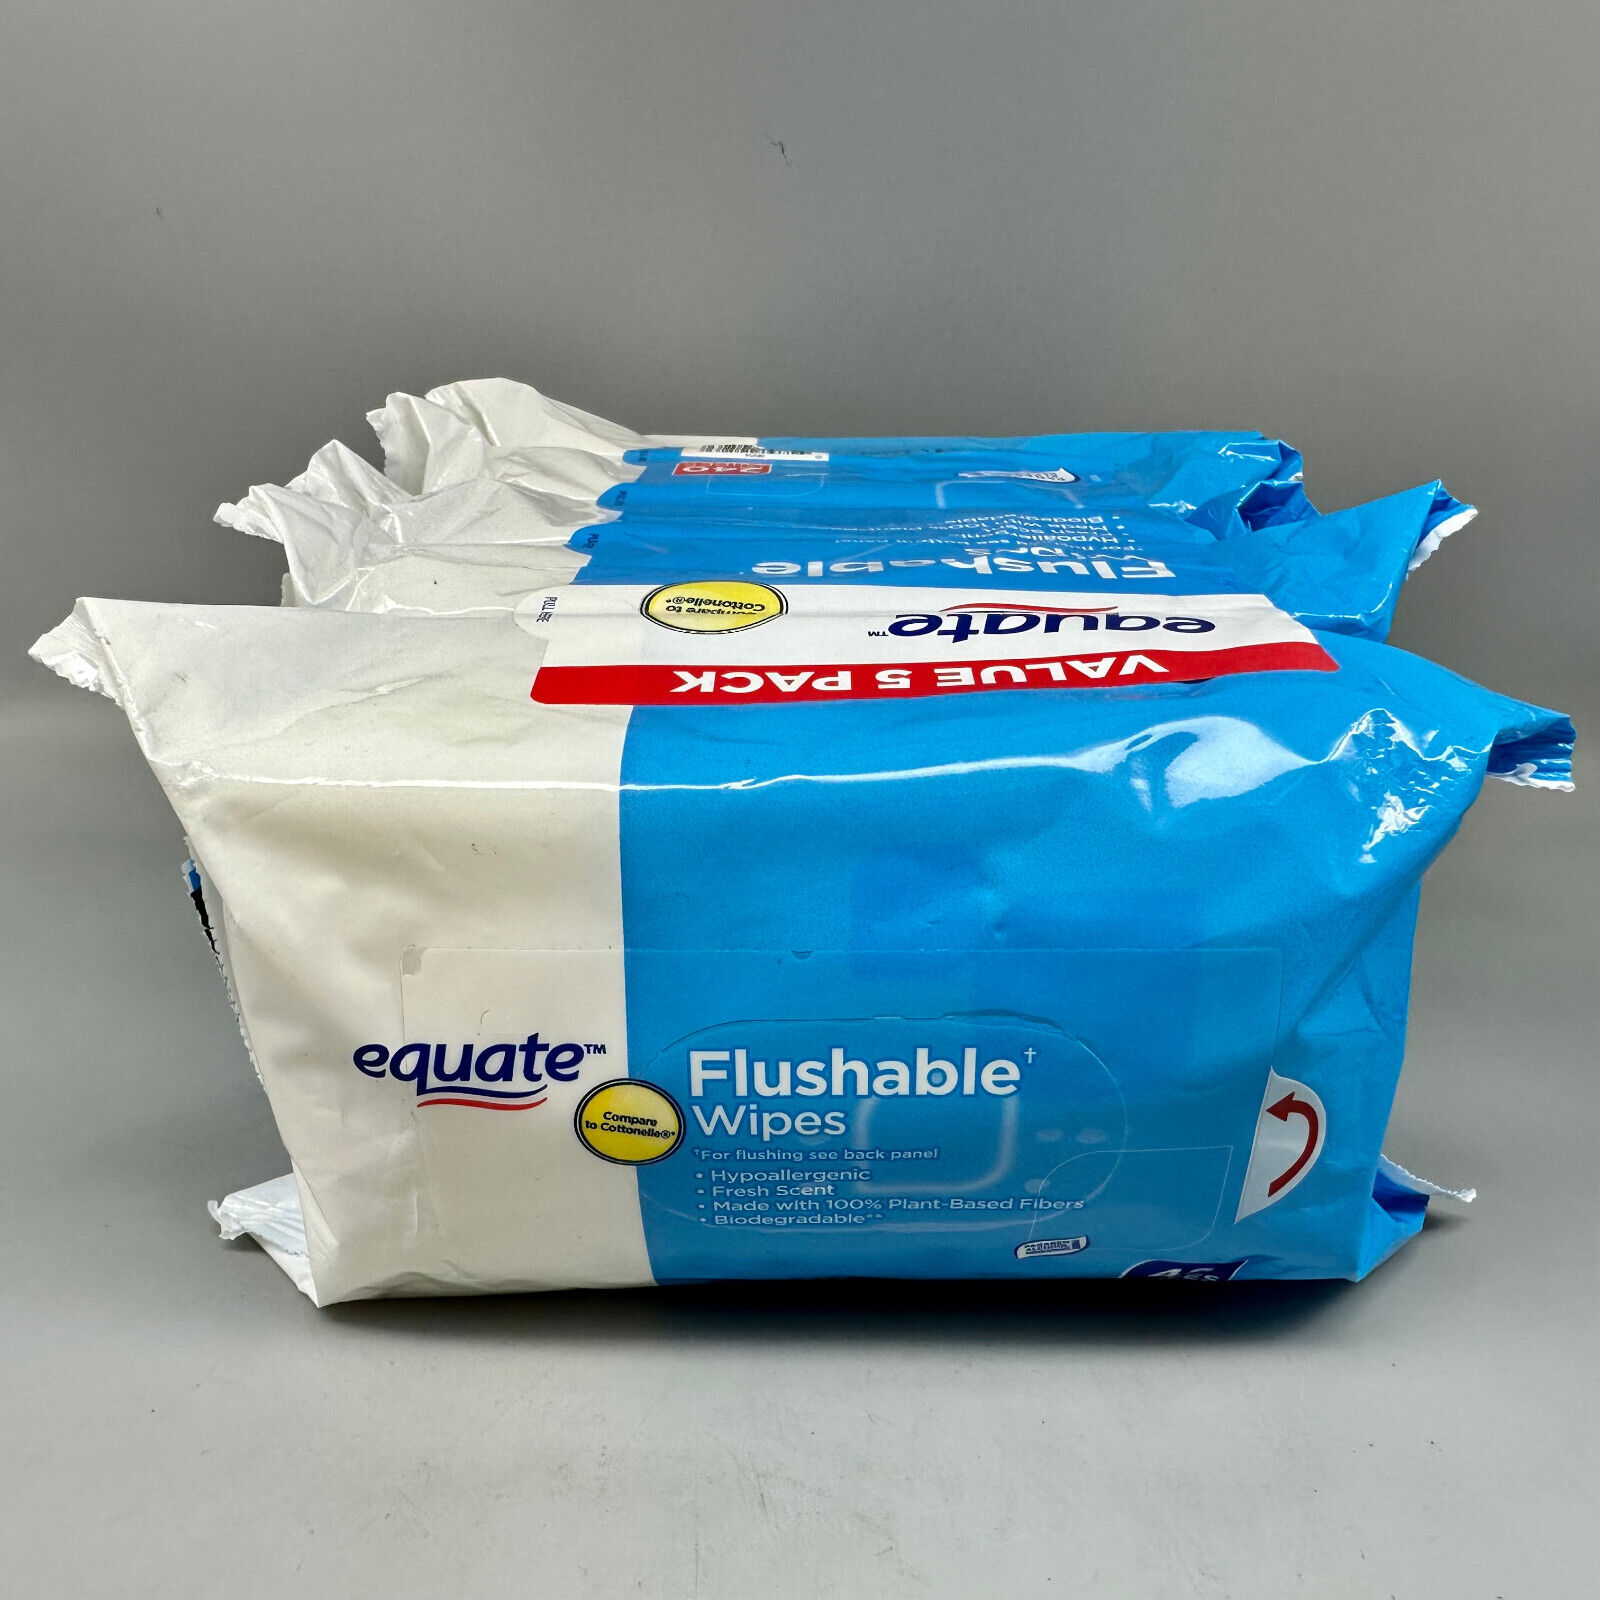 Equate Flushable Hypoallergenic Wipes 48 Wipes x 10 PACK = 480 total EQUATE N/A - фотография #3